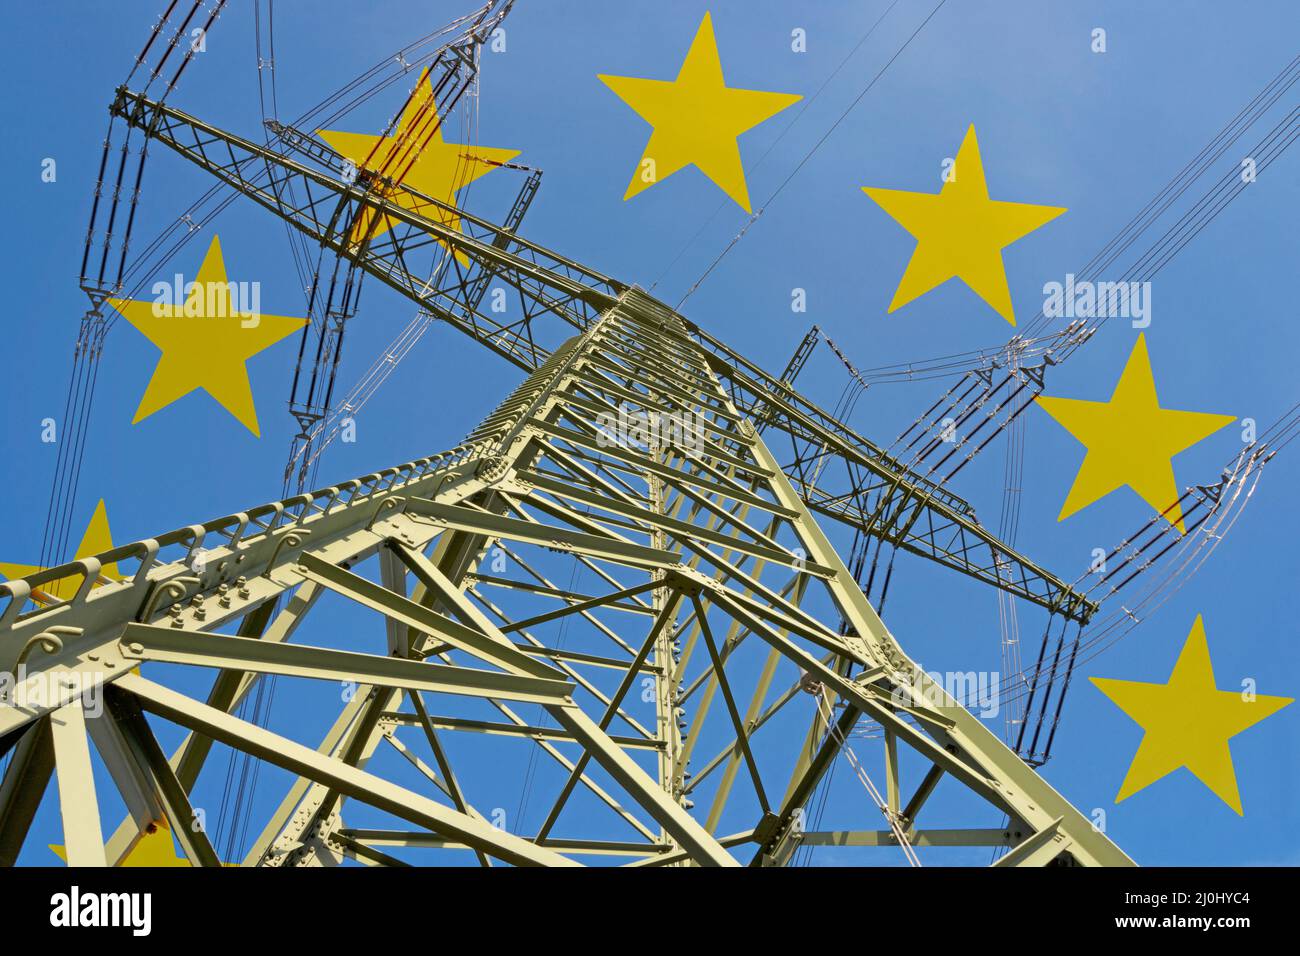 Electricity market in Europe. Symbolic image with European stars in background Stock Photo